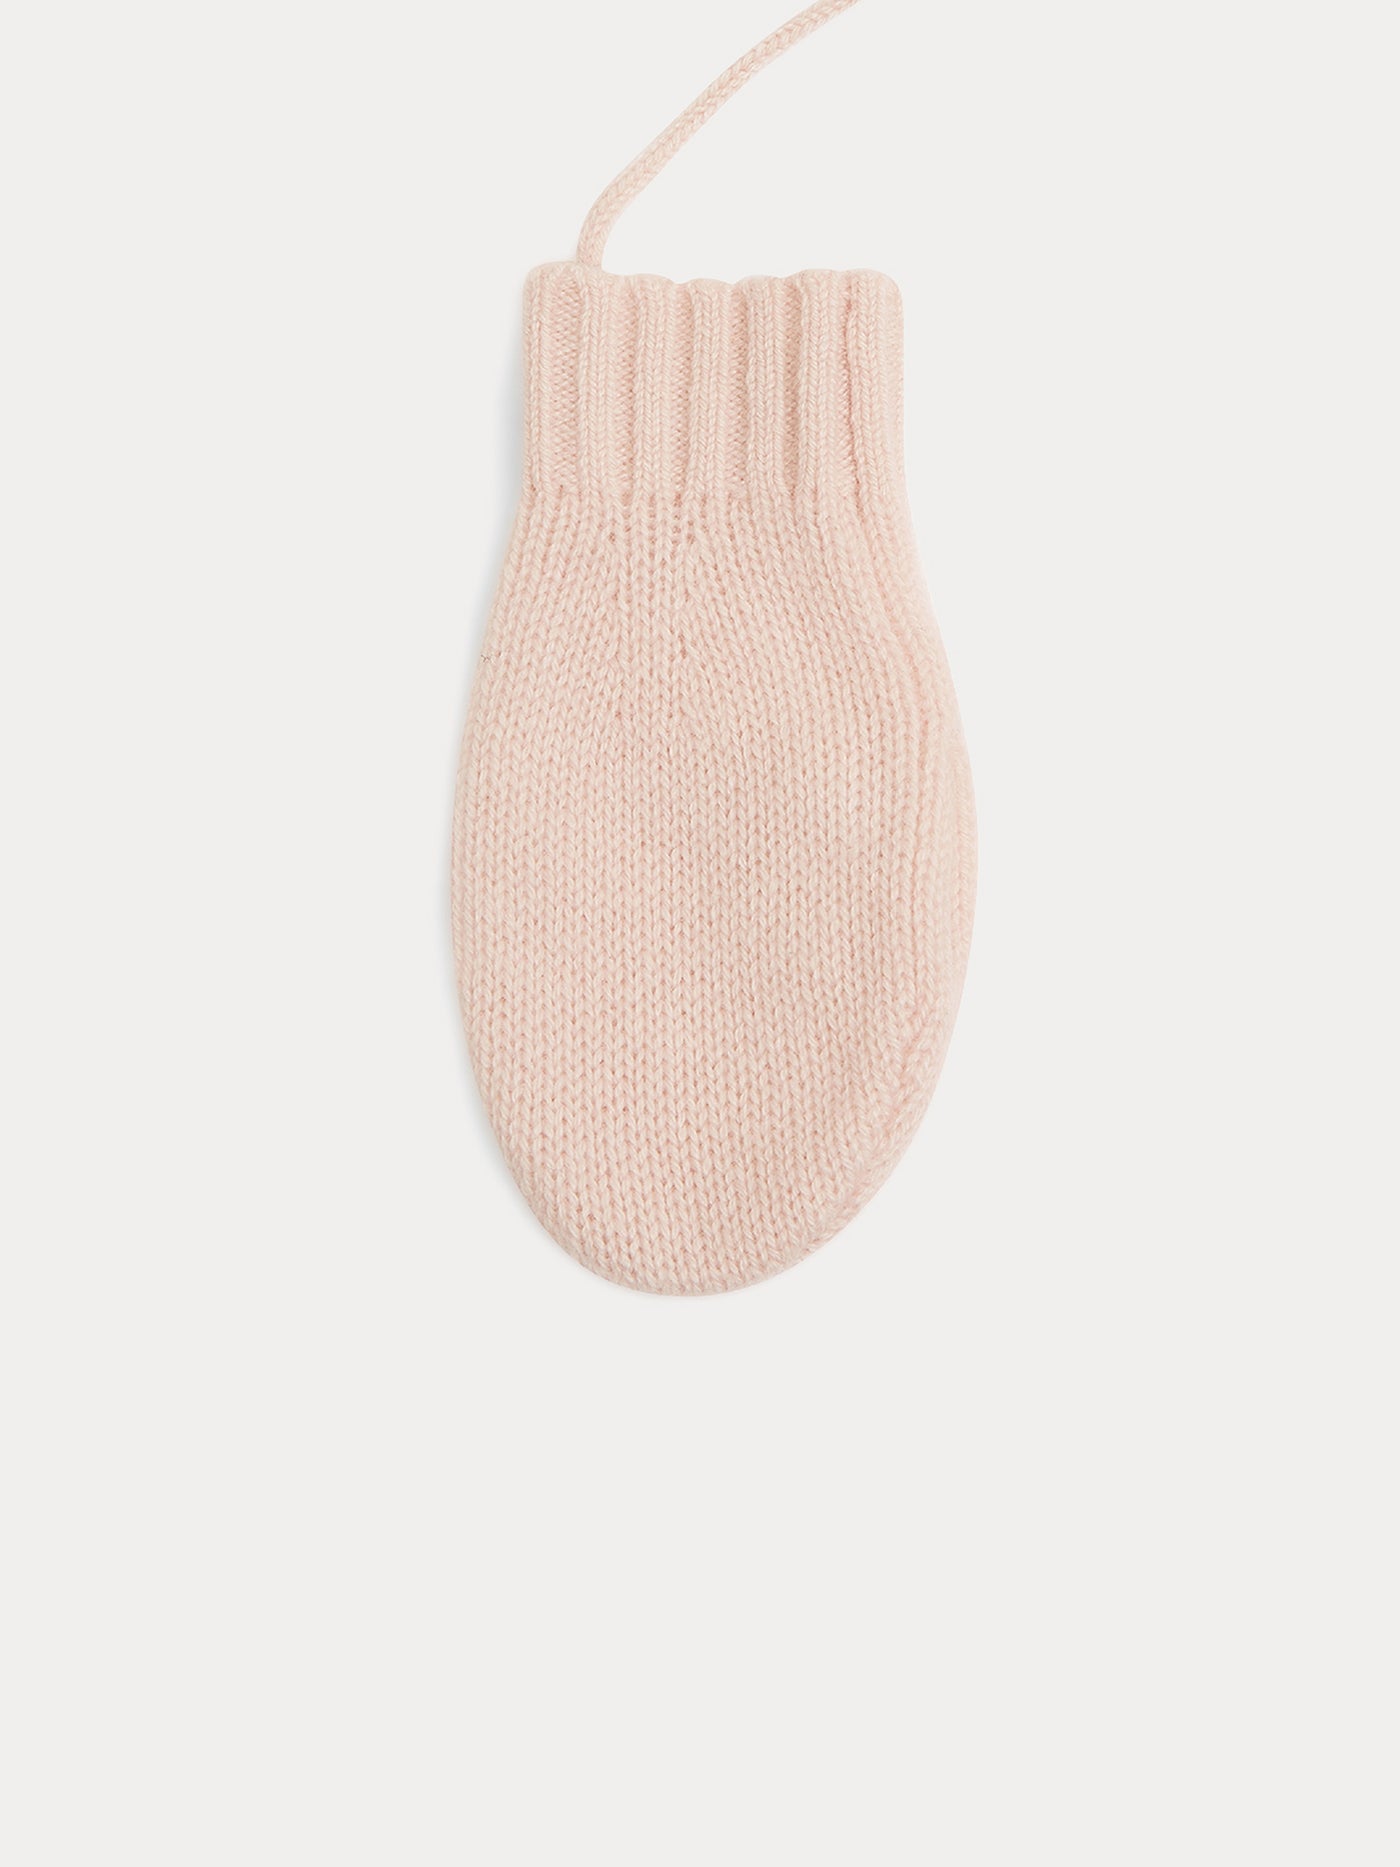 Babies' mittens pale pink